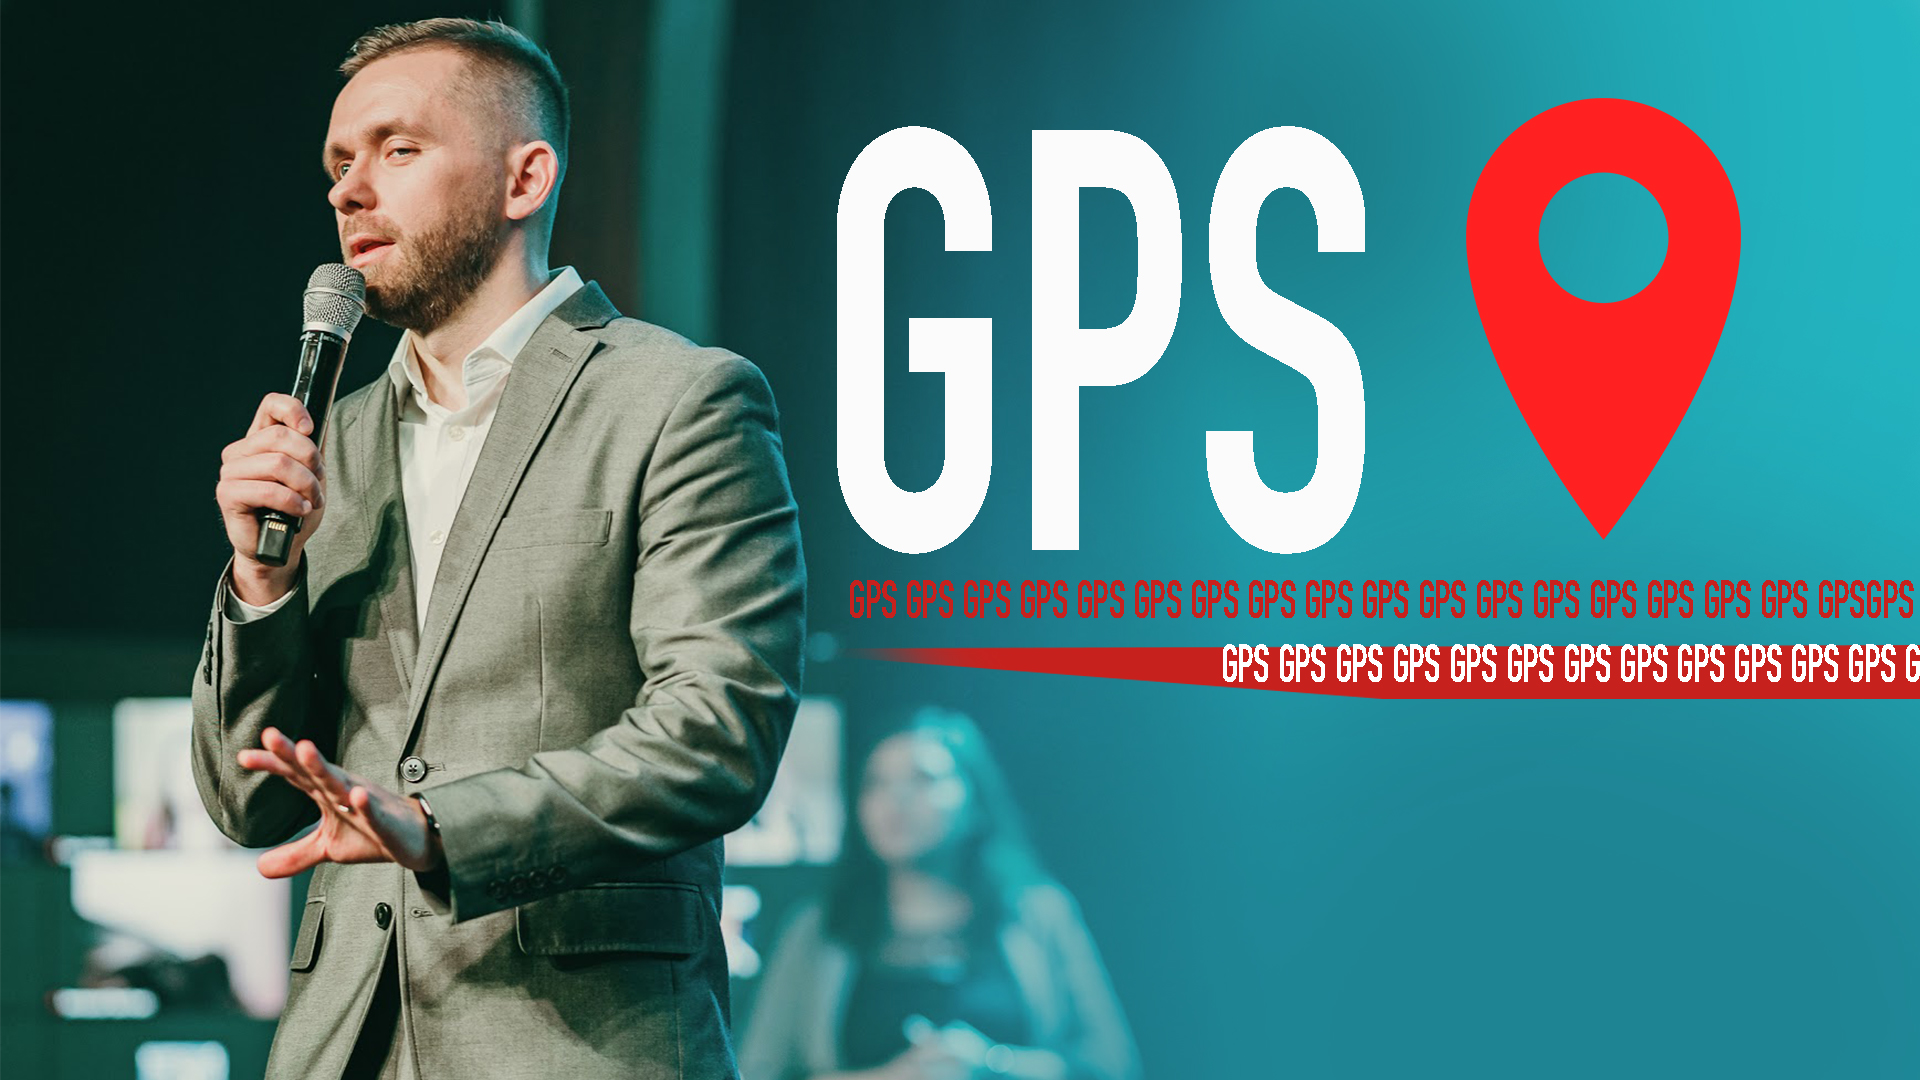 Featured image for “GPS – God’s Positioning System”